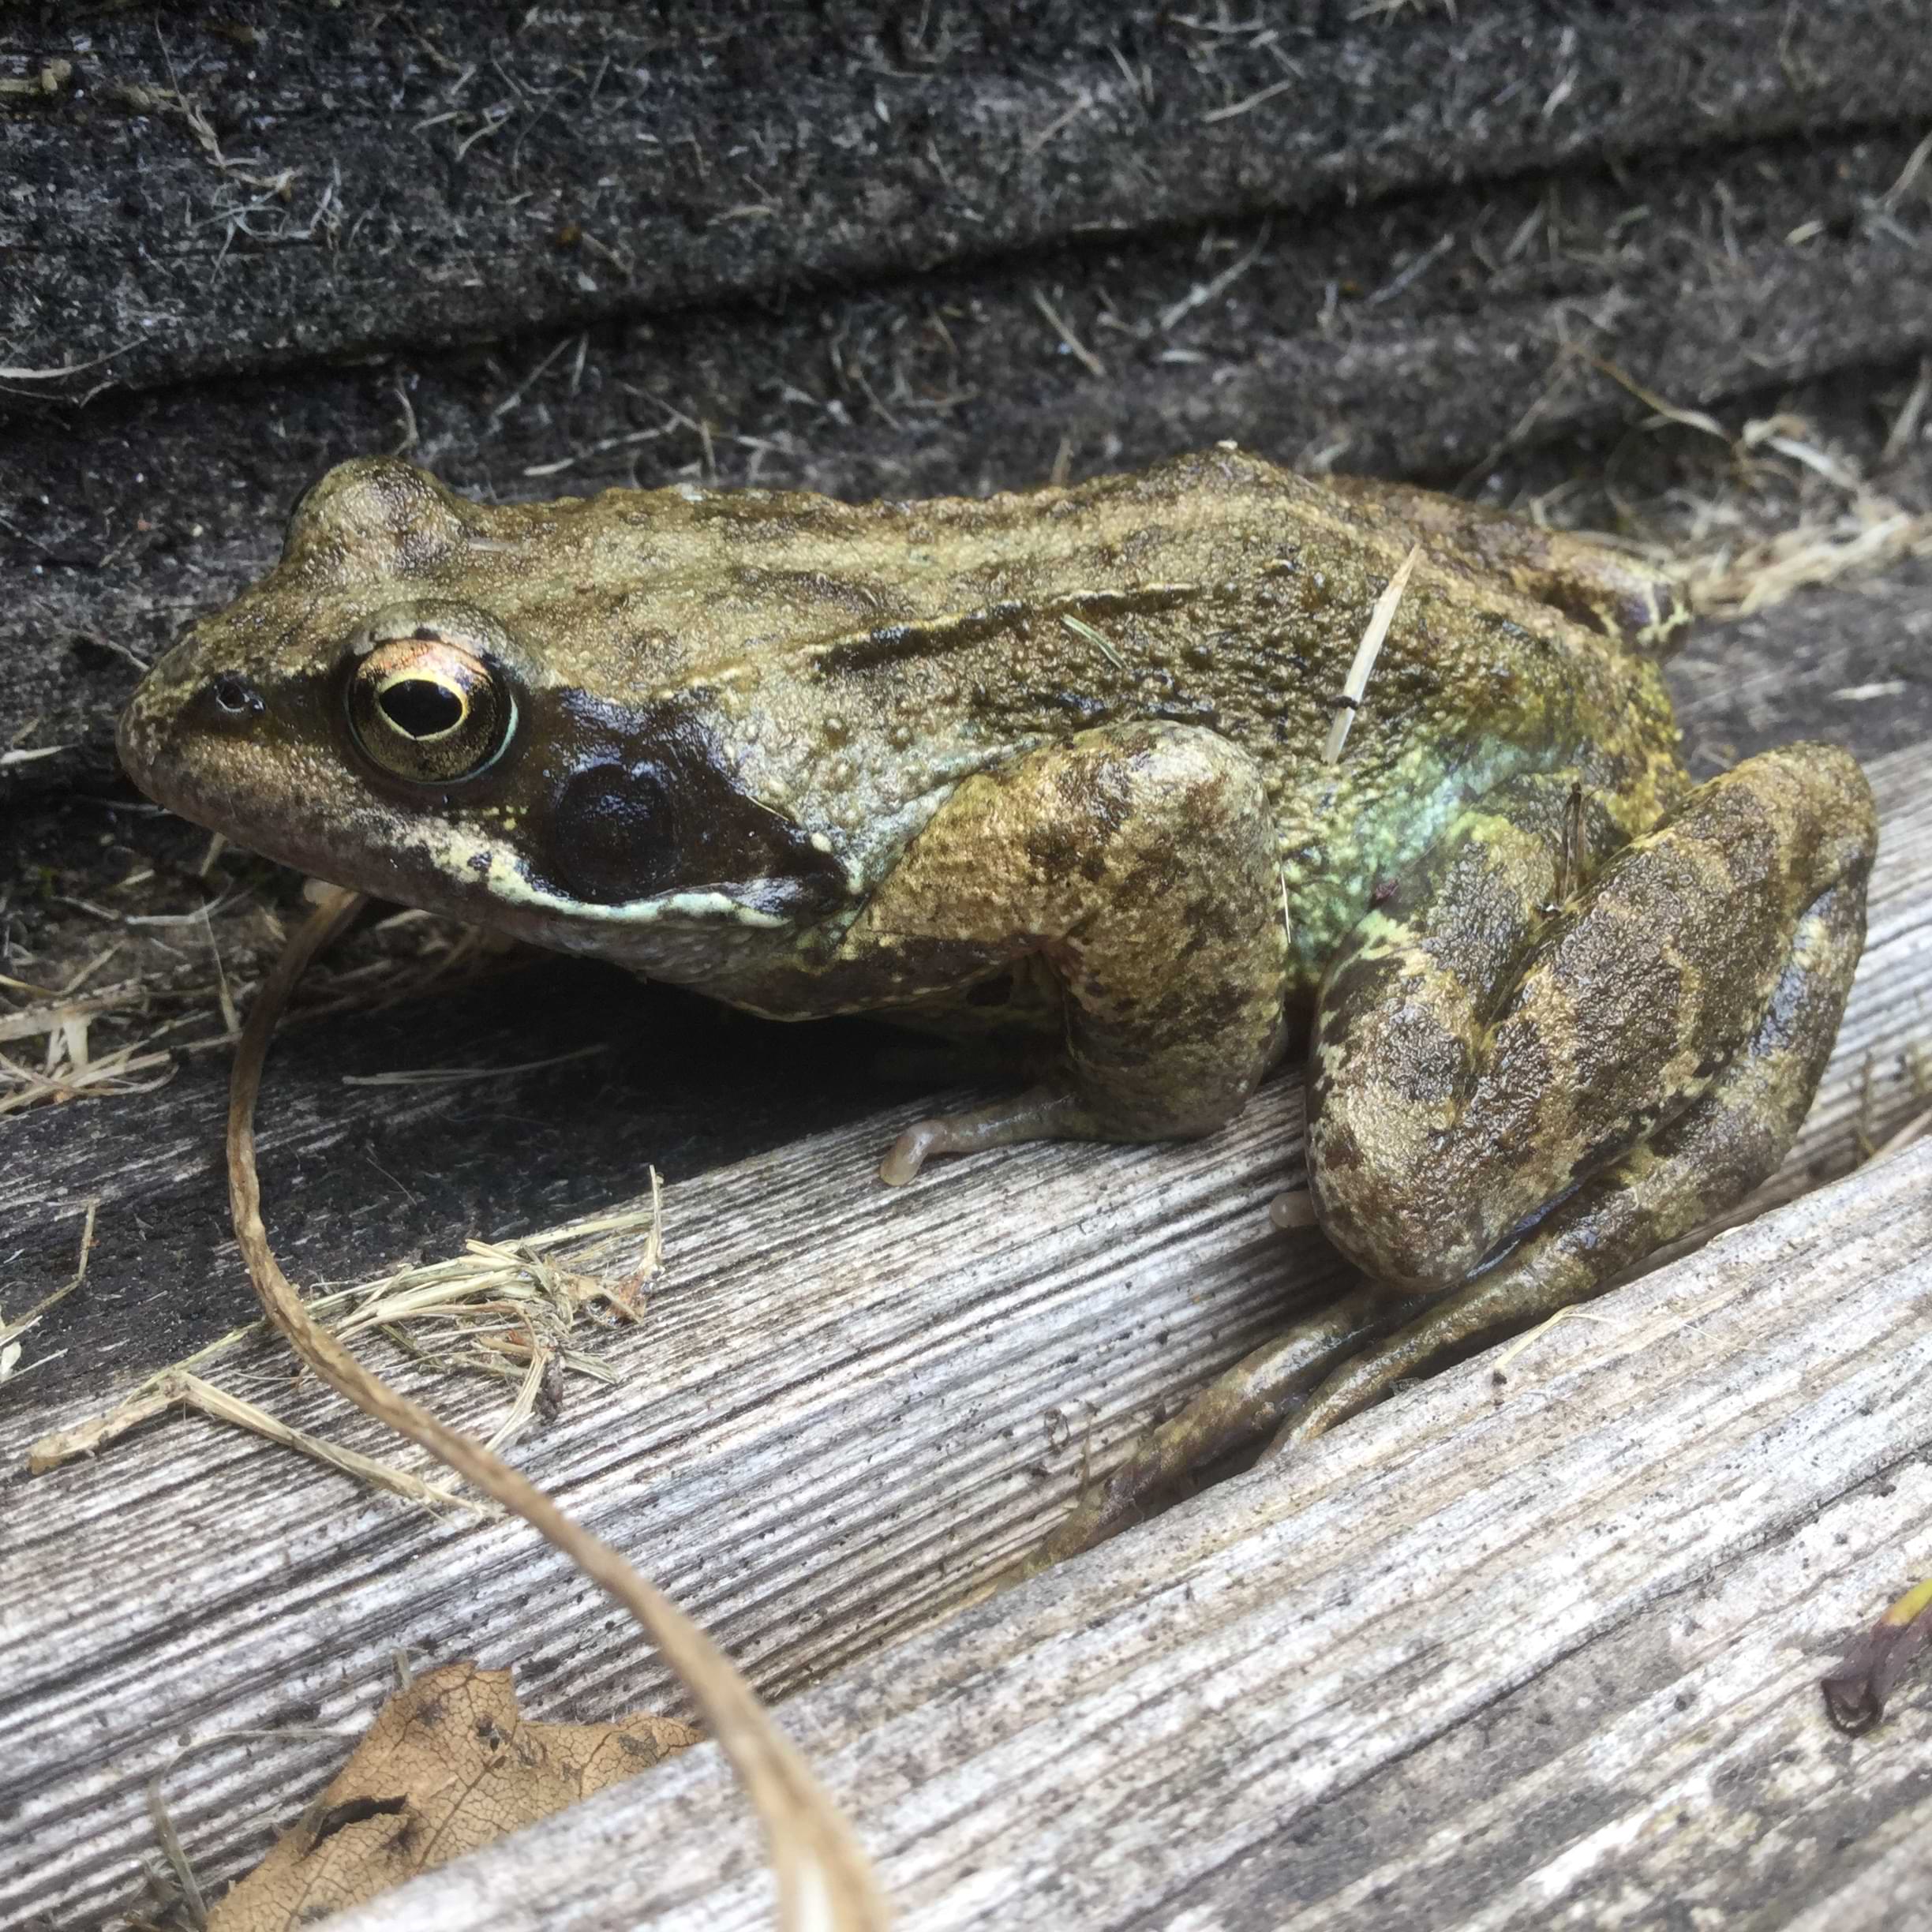 Photo of a frog sitting on wooden decking covered in dry grass. The frog is covered in small bumps and is a vivid mixture of lighter and darker greens. She has golden eyes, a round dark patch on her cheeks, and has banded stripes on her legs.